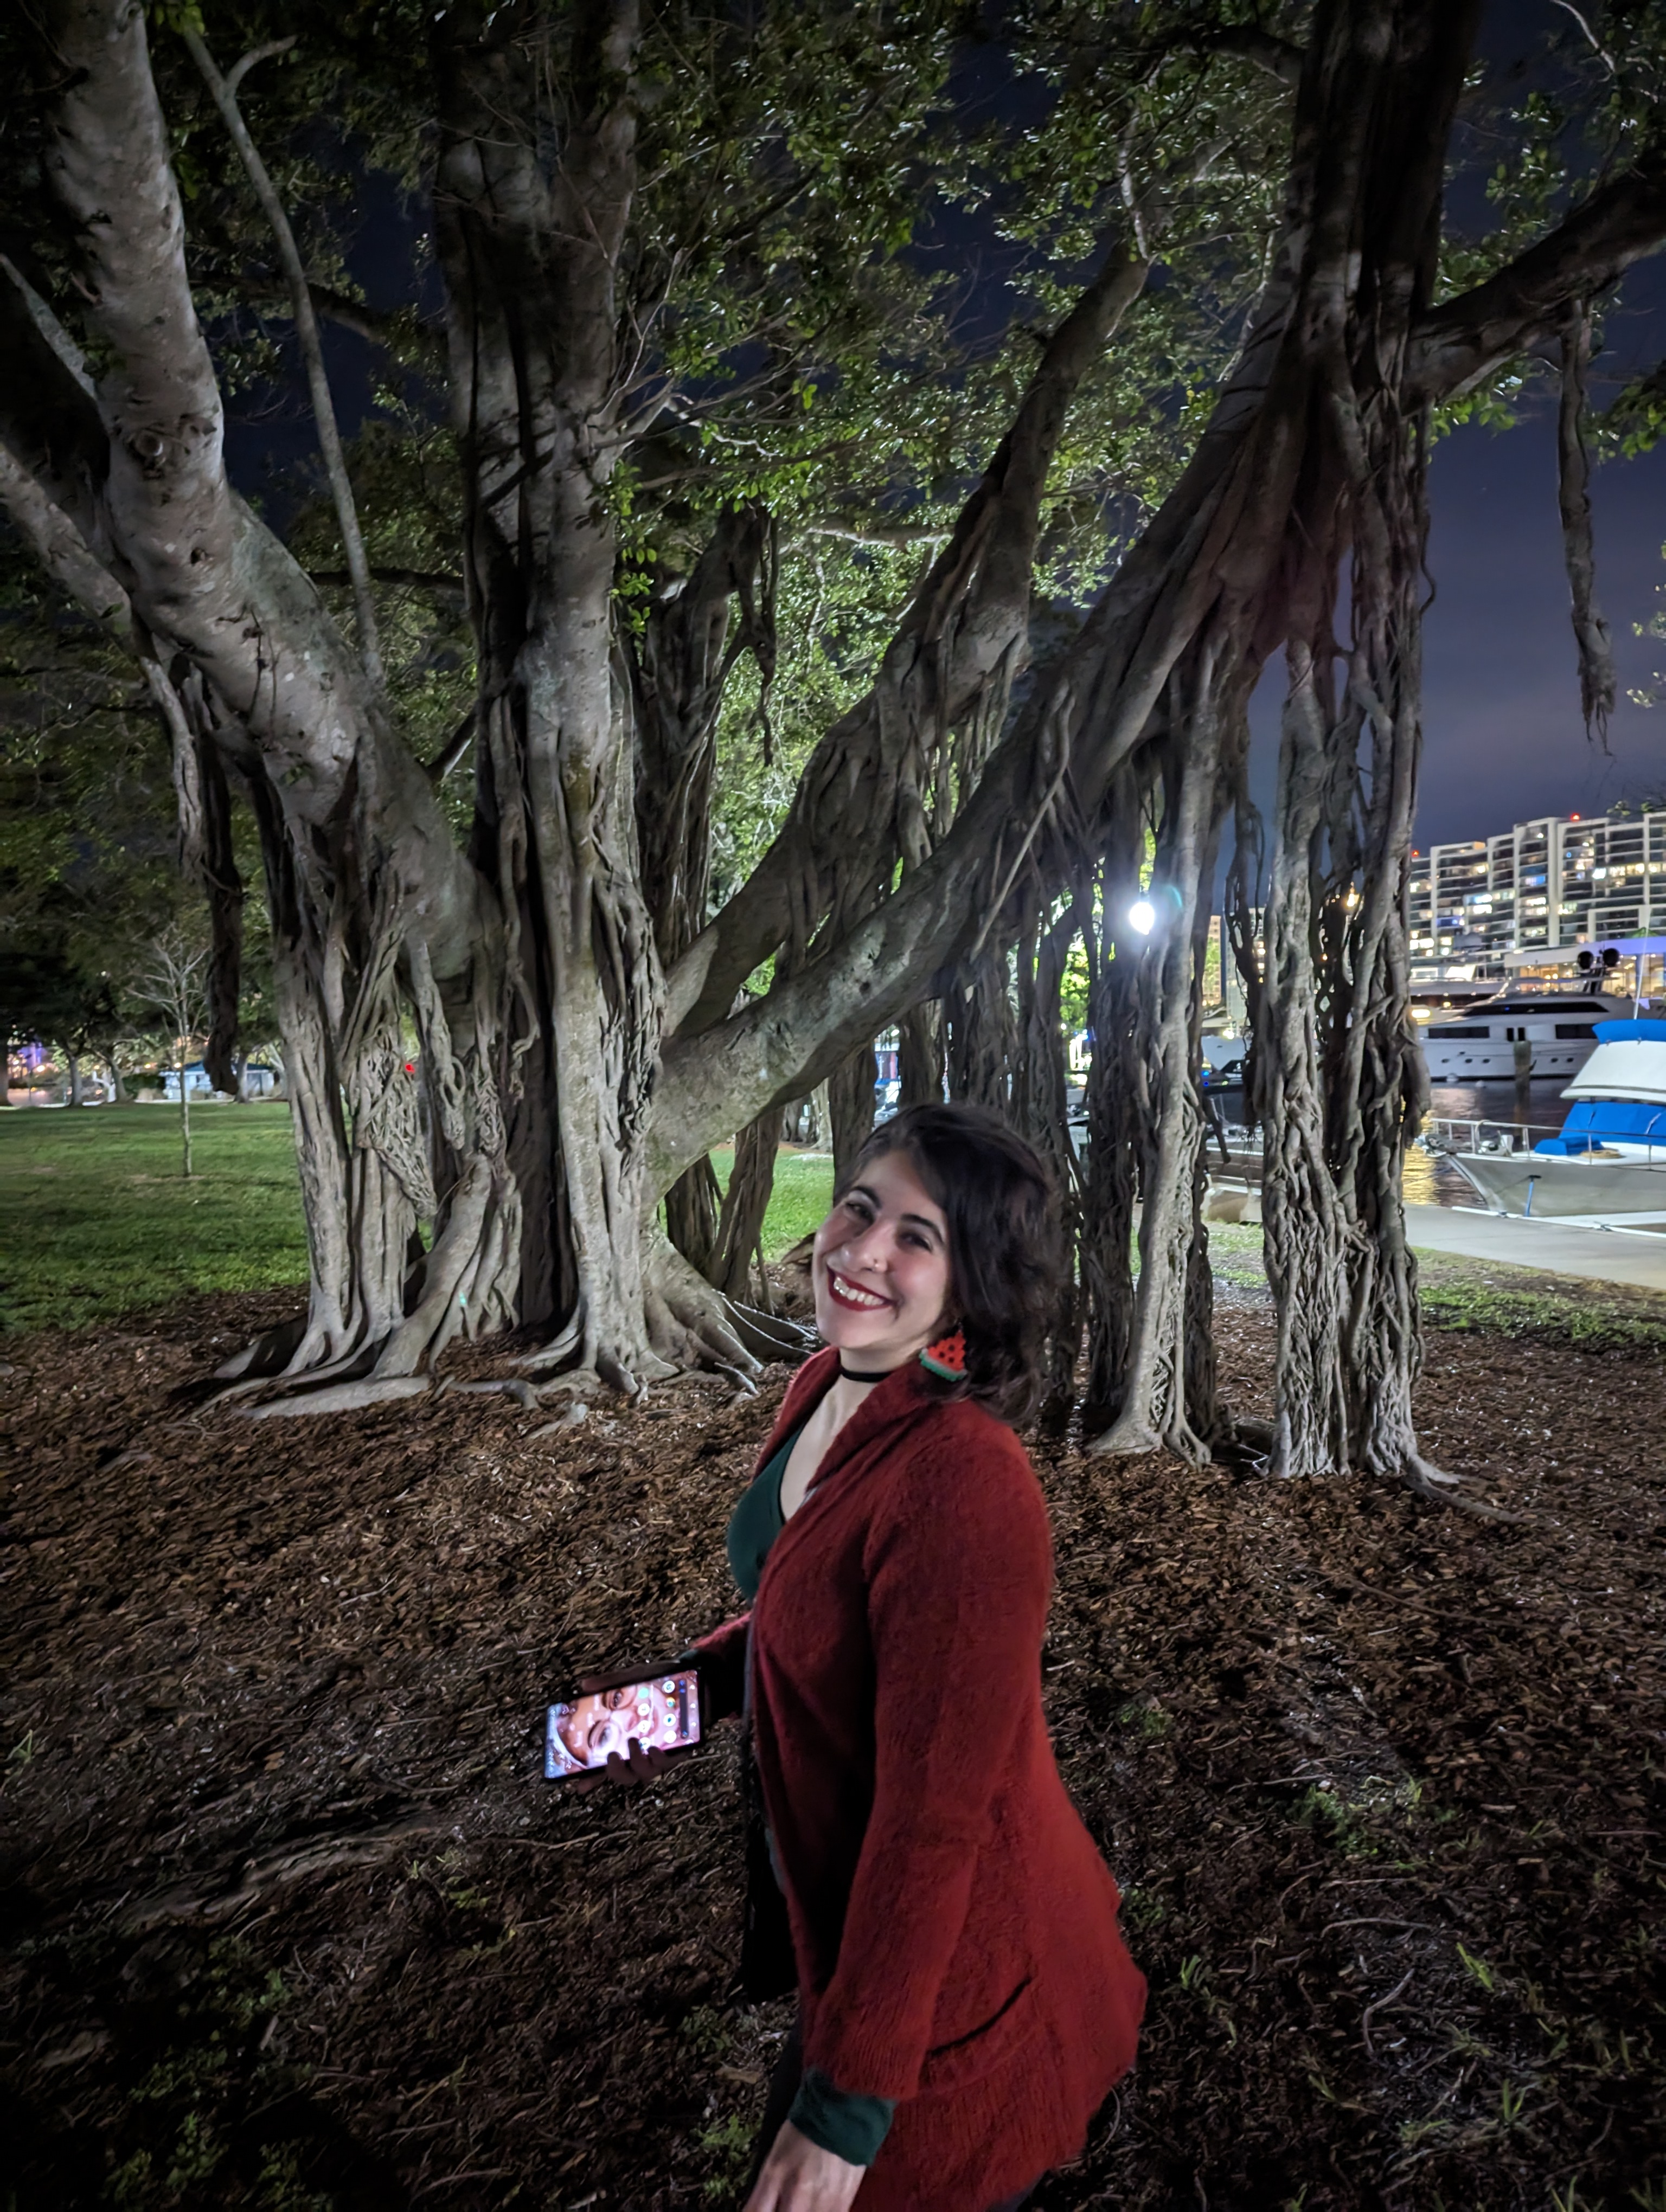 Photo of Eva Fiallos-Diaz in front of a banyan tree with ample roots. Eva is smiling and wearing a red jacket, green shirt, and watermelon earrings.